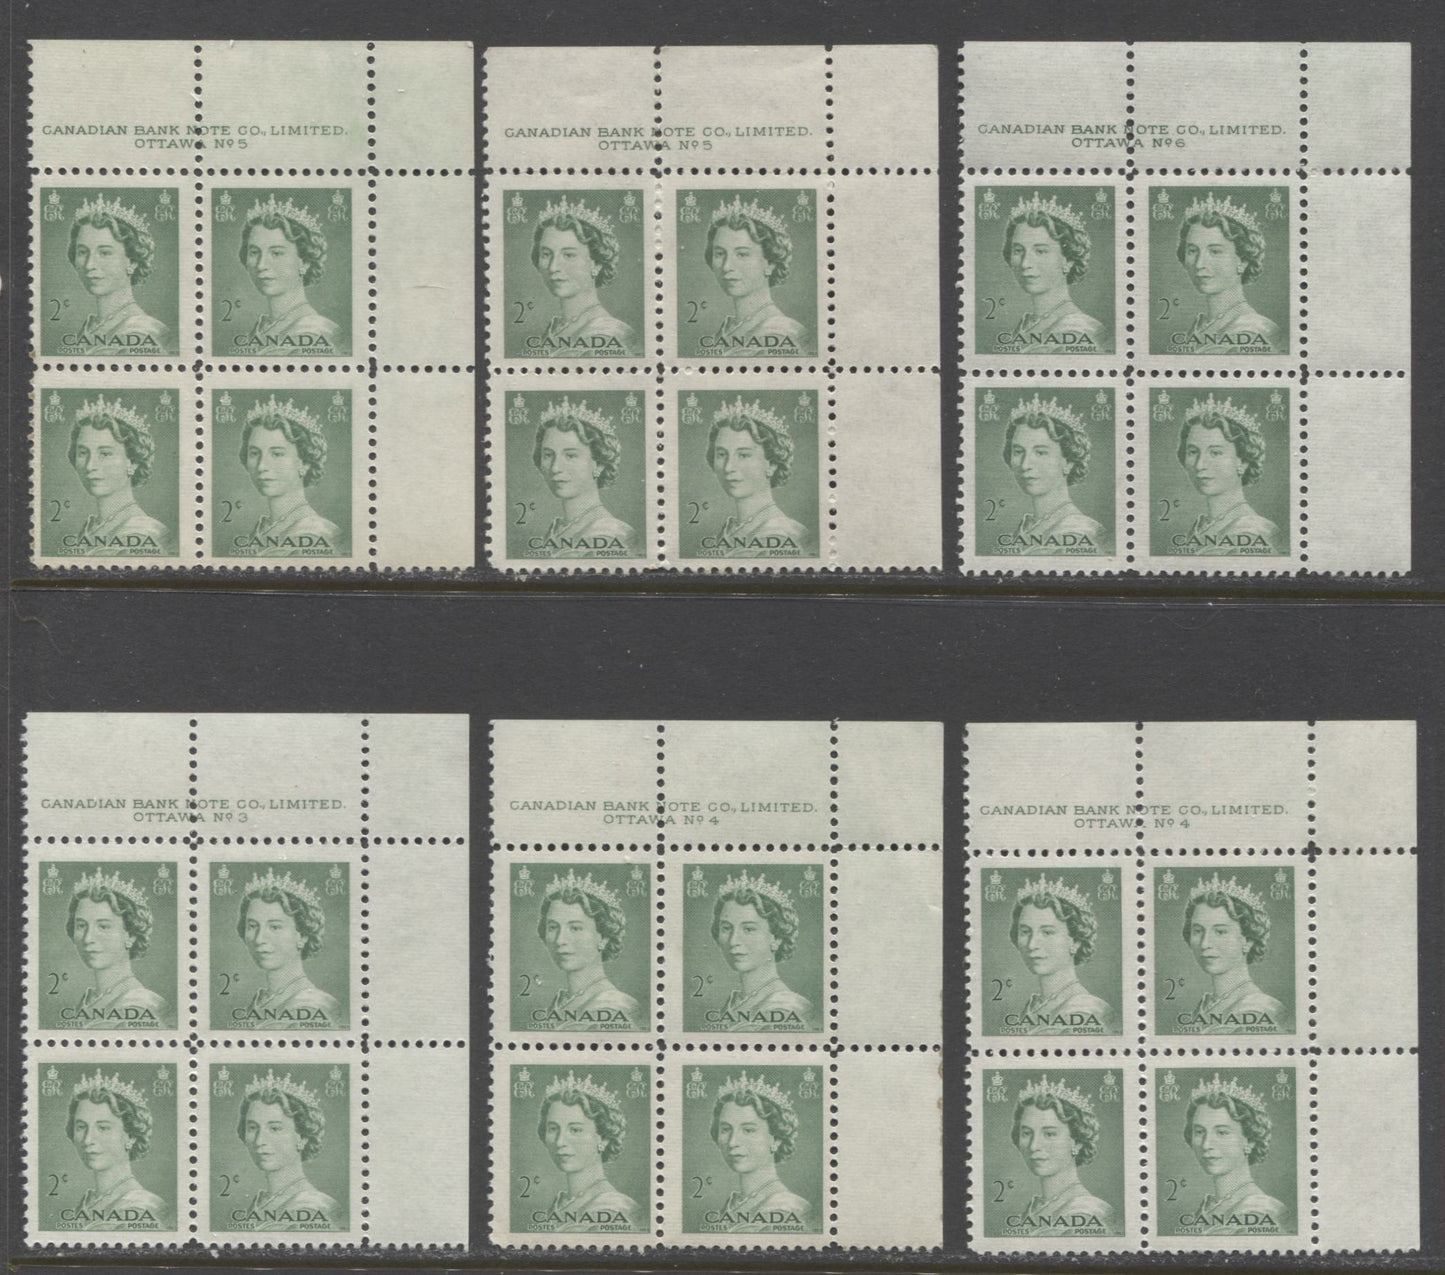 Lot 28 Canada #325-326 1c-2c Violet Brown-Green Queen Elizabeth II, 1953 Karsh Issue, 15 VFNH UR Plates 1-6 Blocks Of 4 On Horizontal Wove Papers With Additional Shades